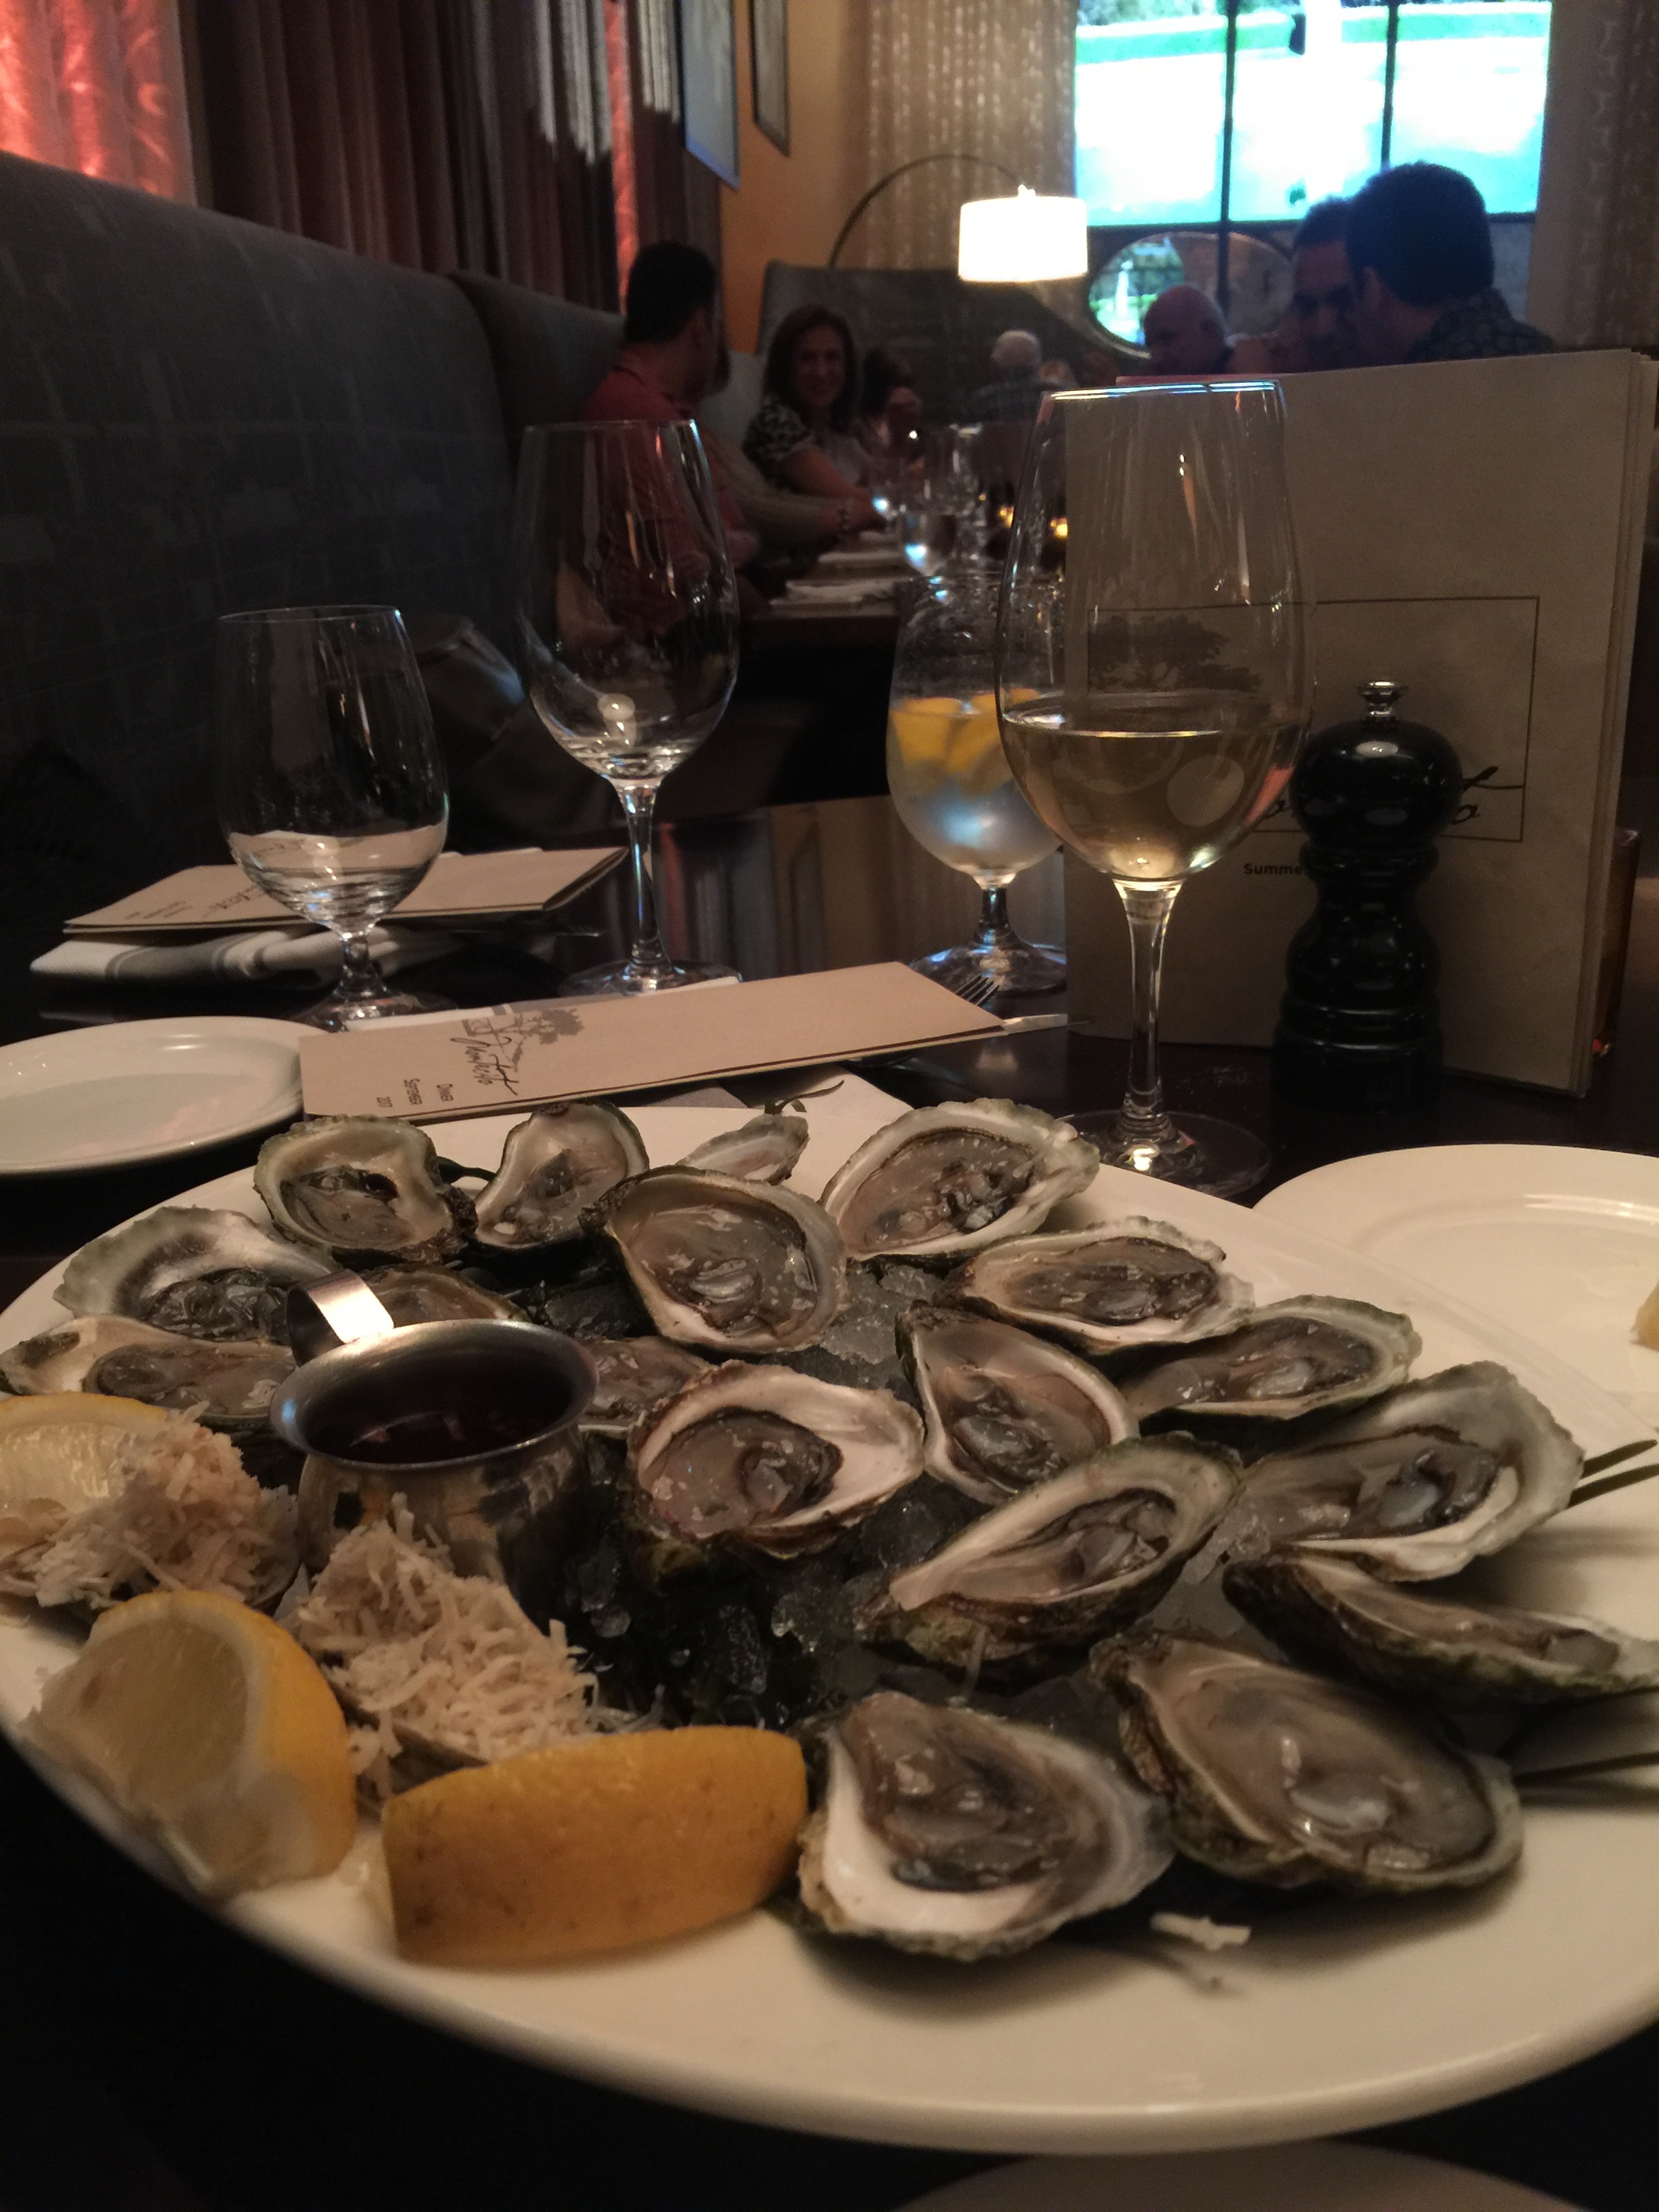 Plate of oysters and a glass of white wine